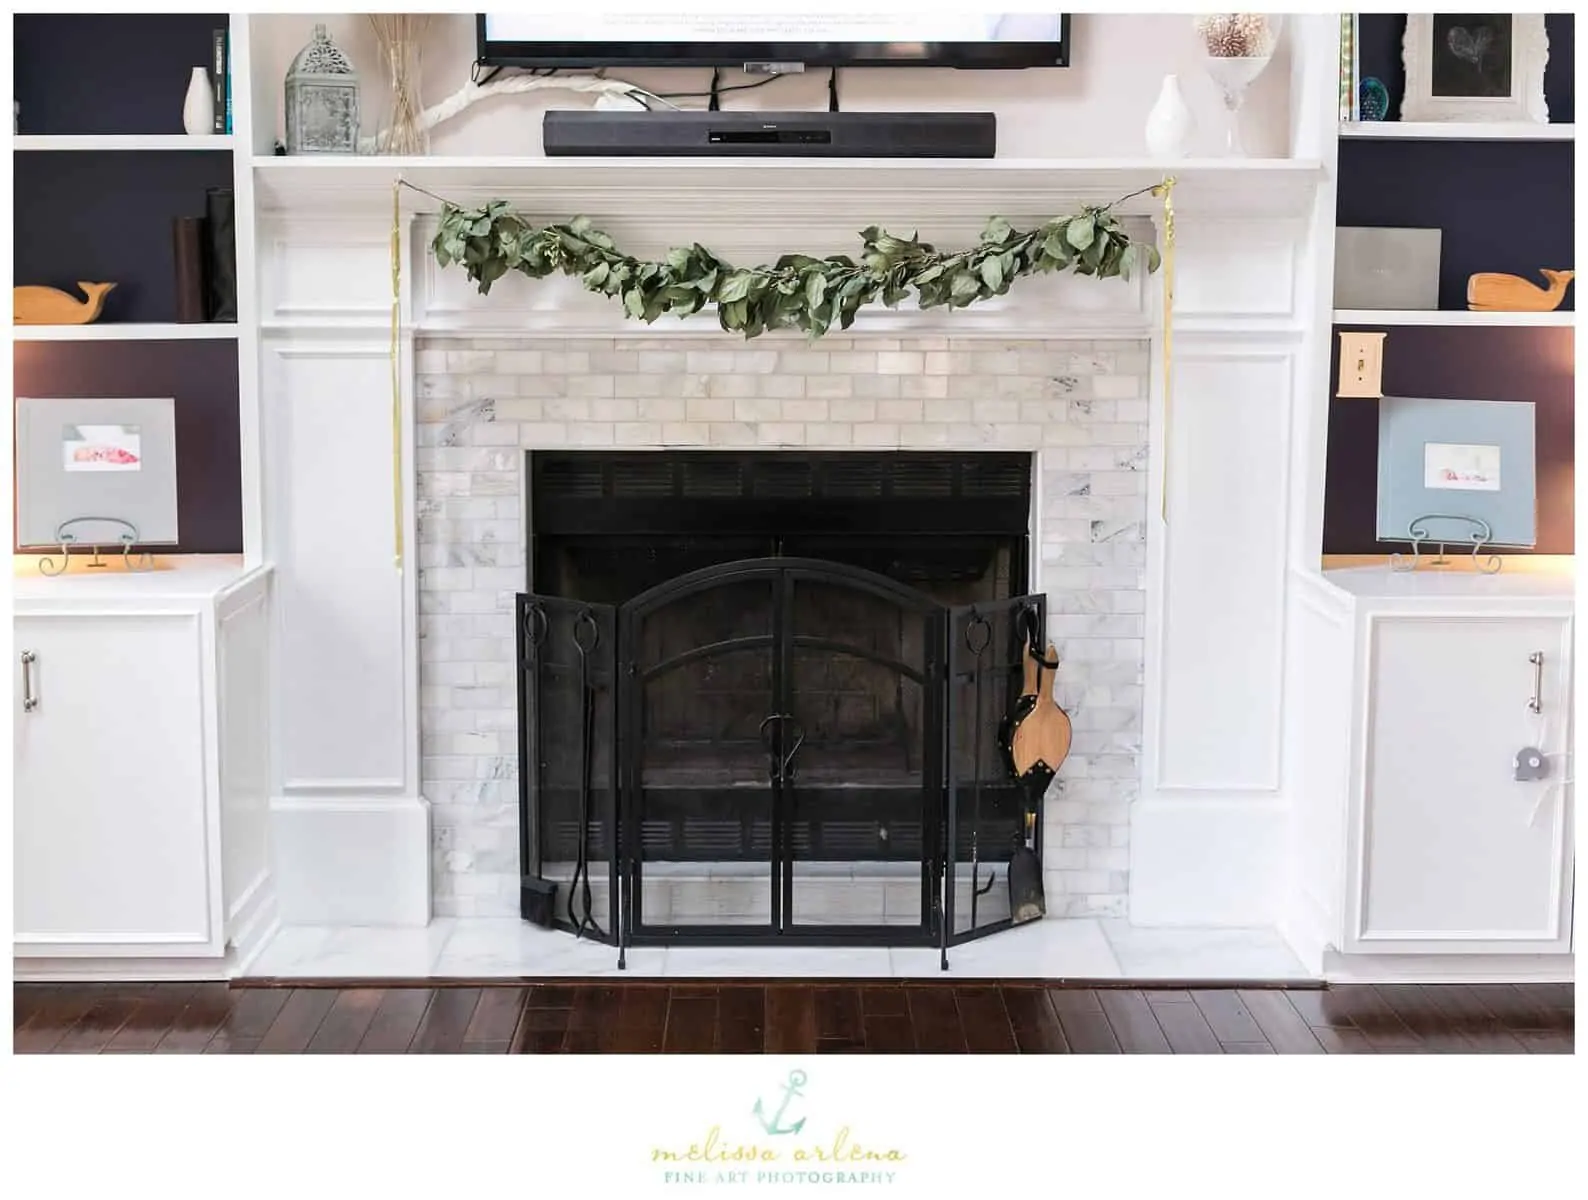 I might have stolen (with permission) that garland from Amanda Veronee's last floral workshop ;). I fell in love with it and knew I wanted to pretty up my fireplace with it. Months later and it is most definitely dead but I love it so much I don't want to take it down :(.